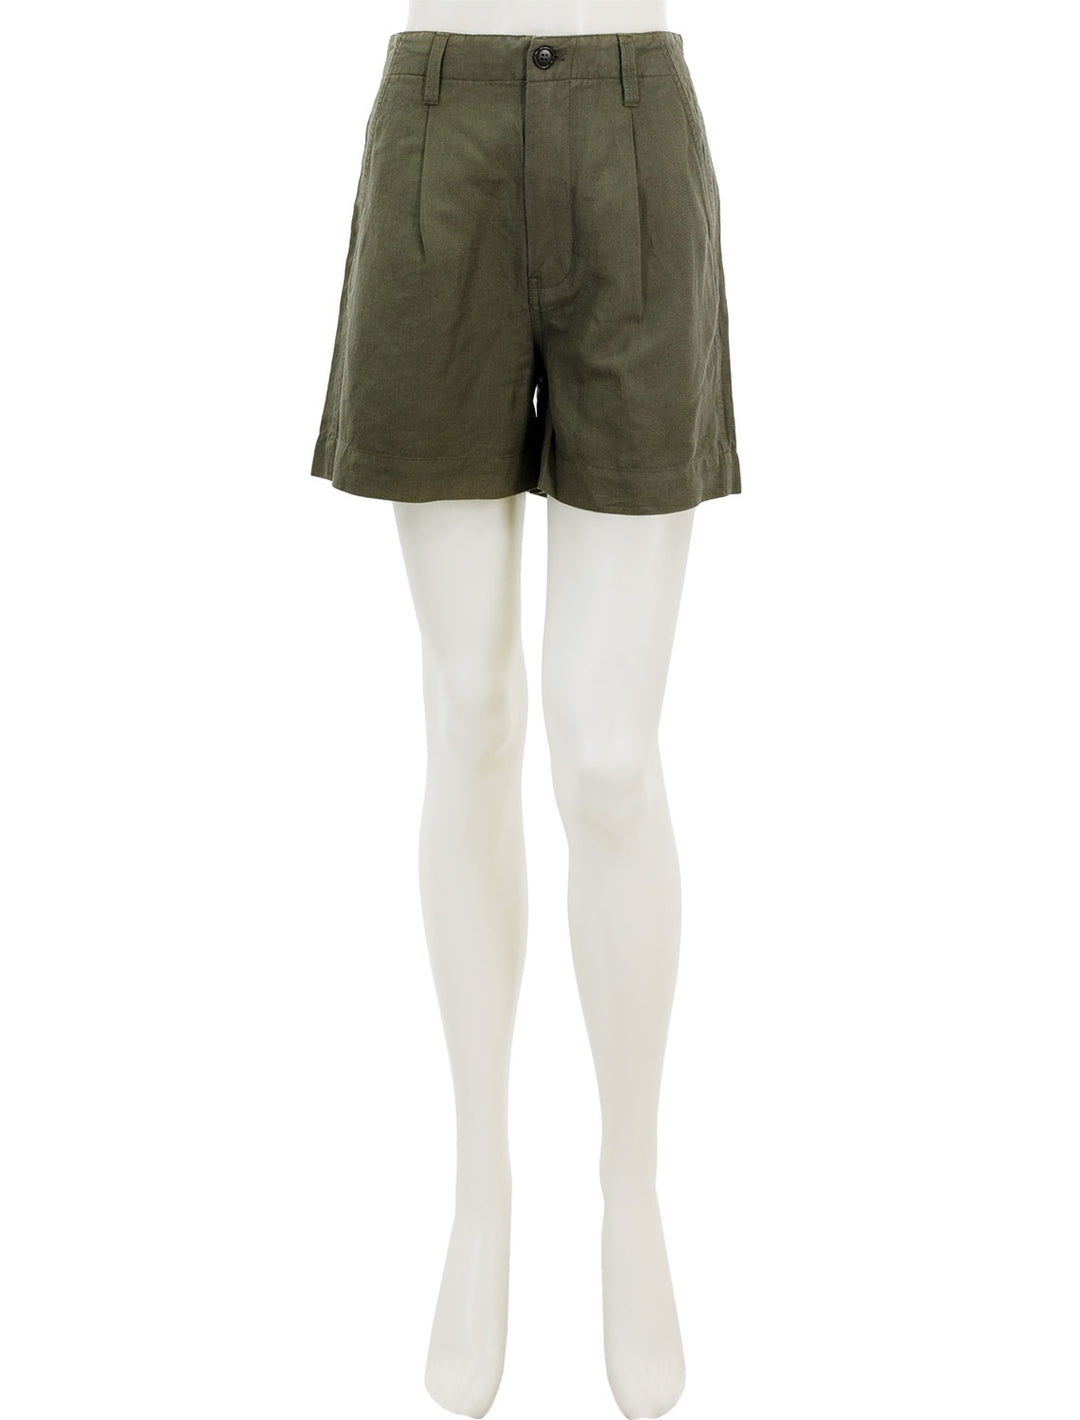 Front view of Alex Mill's pleated twill shorts in pulgia olive.